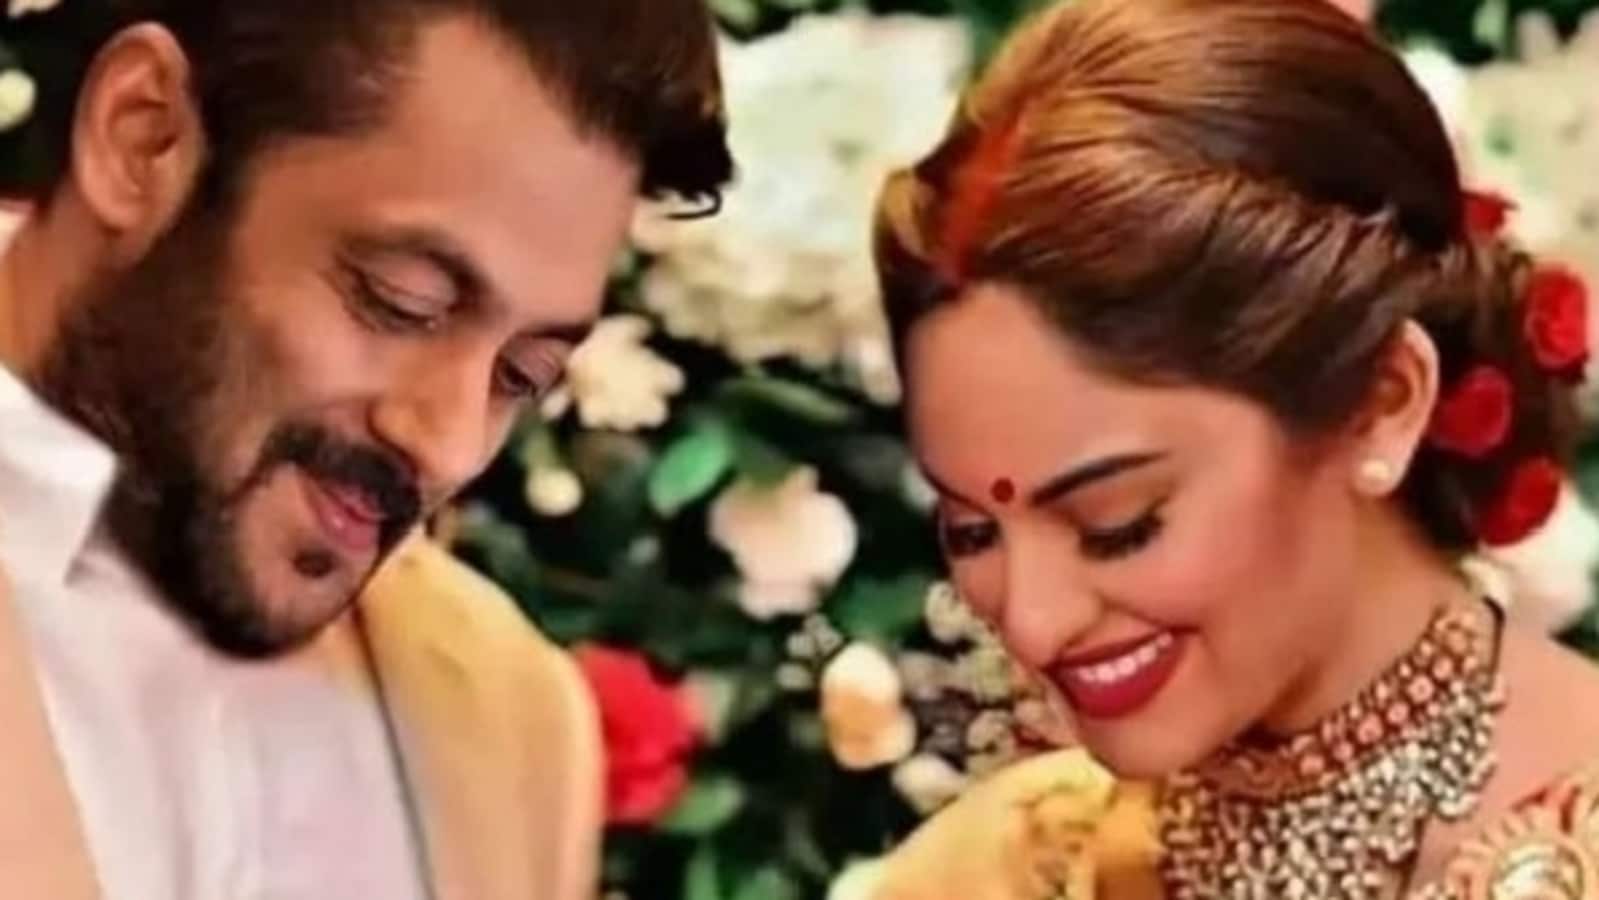 Sonaxi Nangi Videos - Salman, Sonakshi's fans are confused as fake pic shows them as a married  couple | Bollywood - Hindustan Times